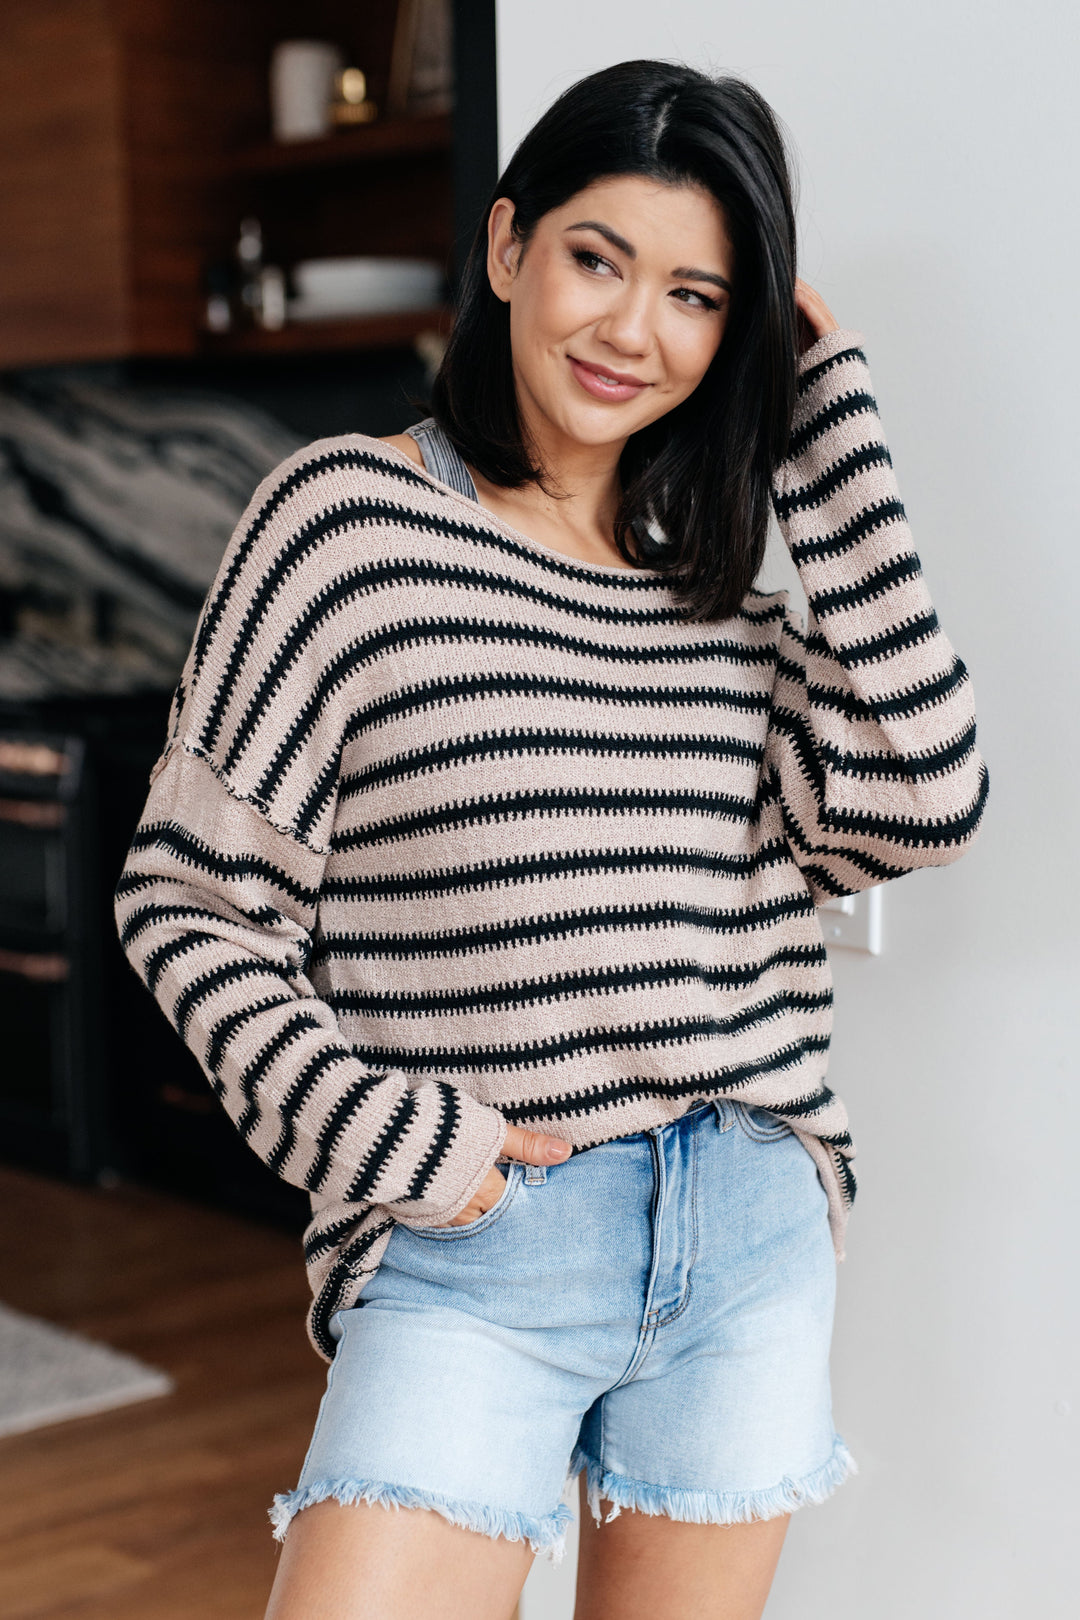 Self Assured Striped Sweater-Sweaters/Sweatshirts-Inspired by Justeen-Women's Clothing Boutique in Chicago, Illinois